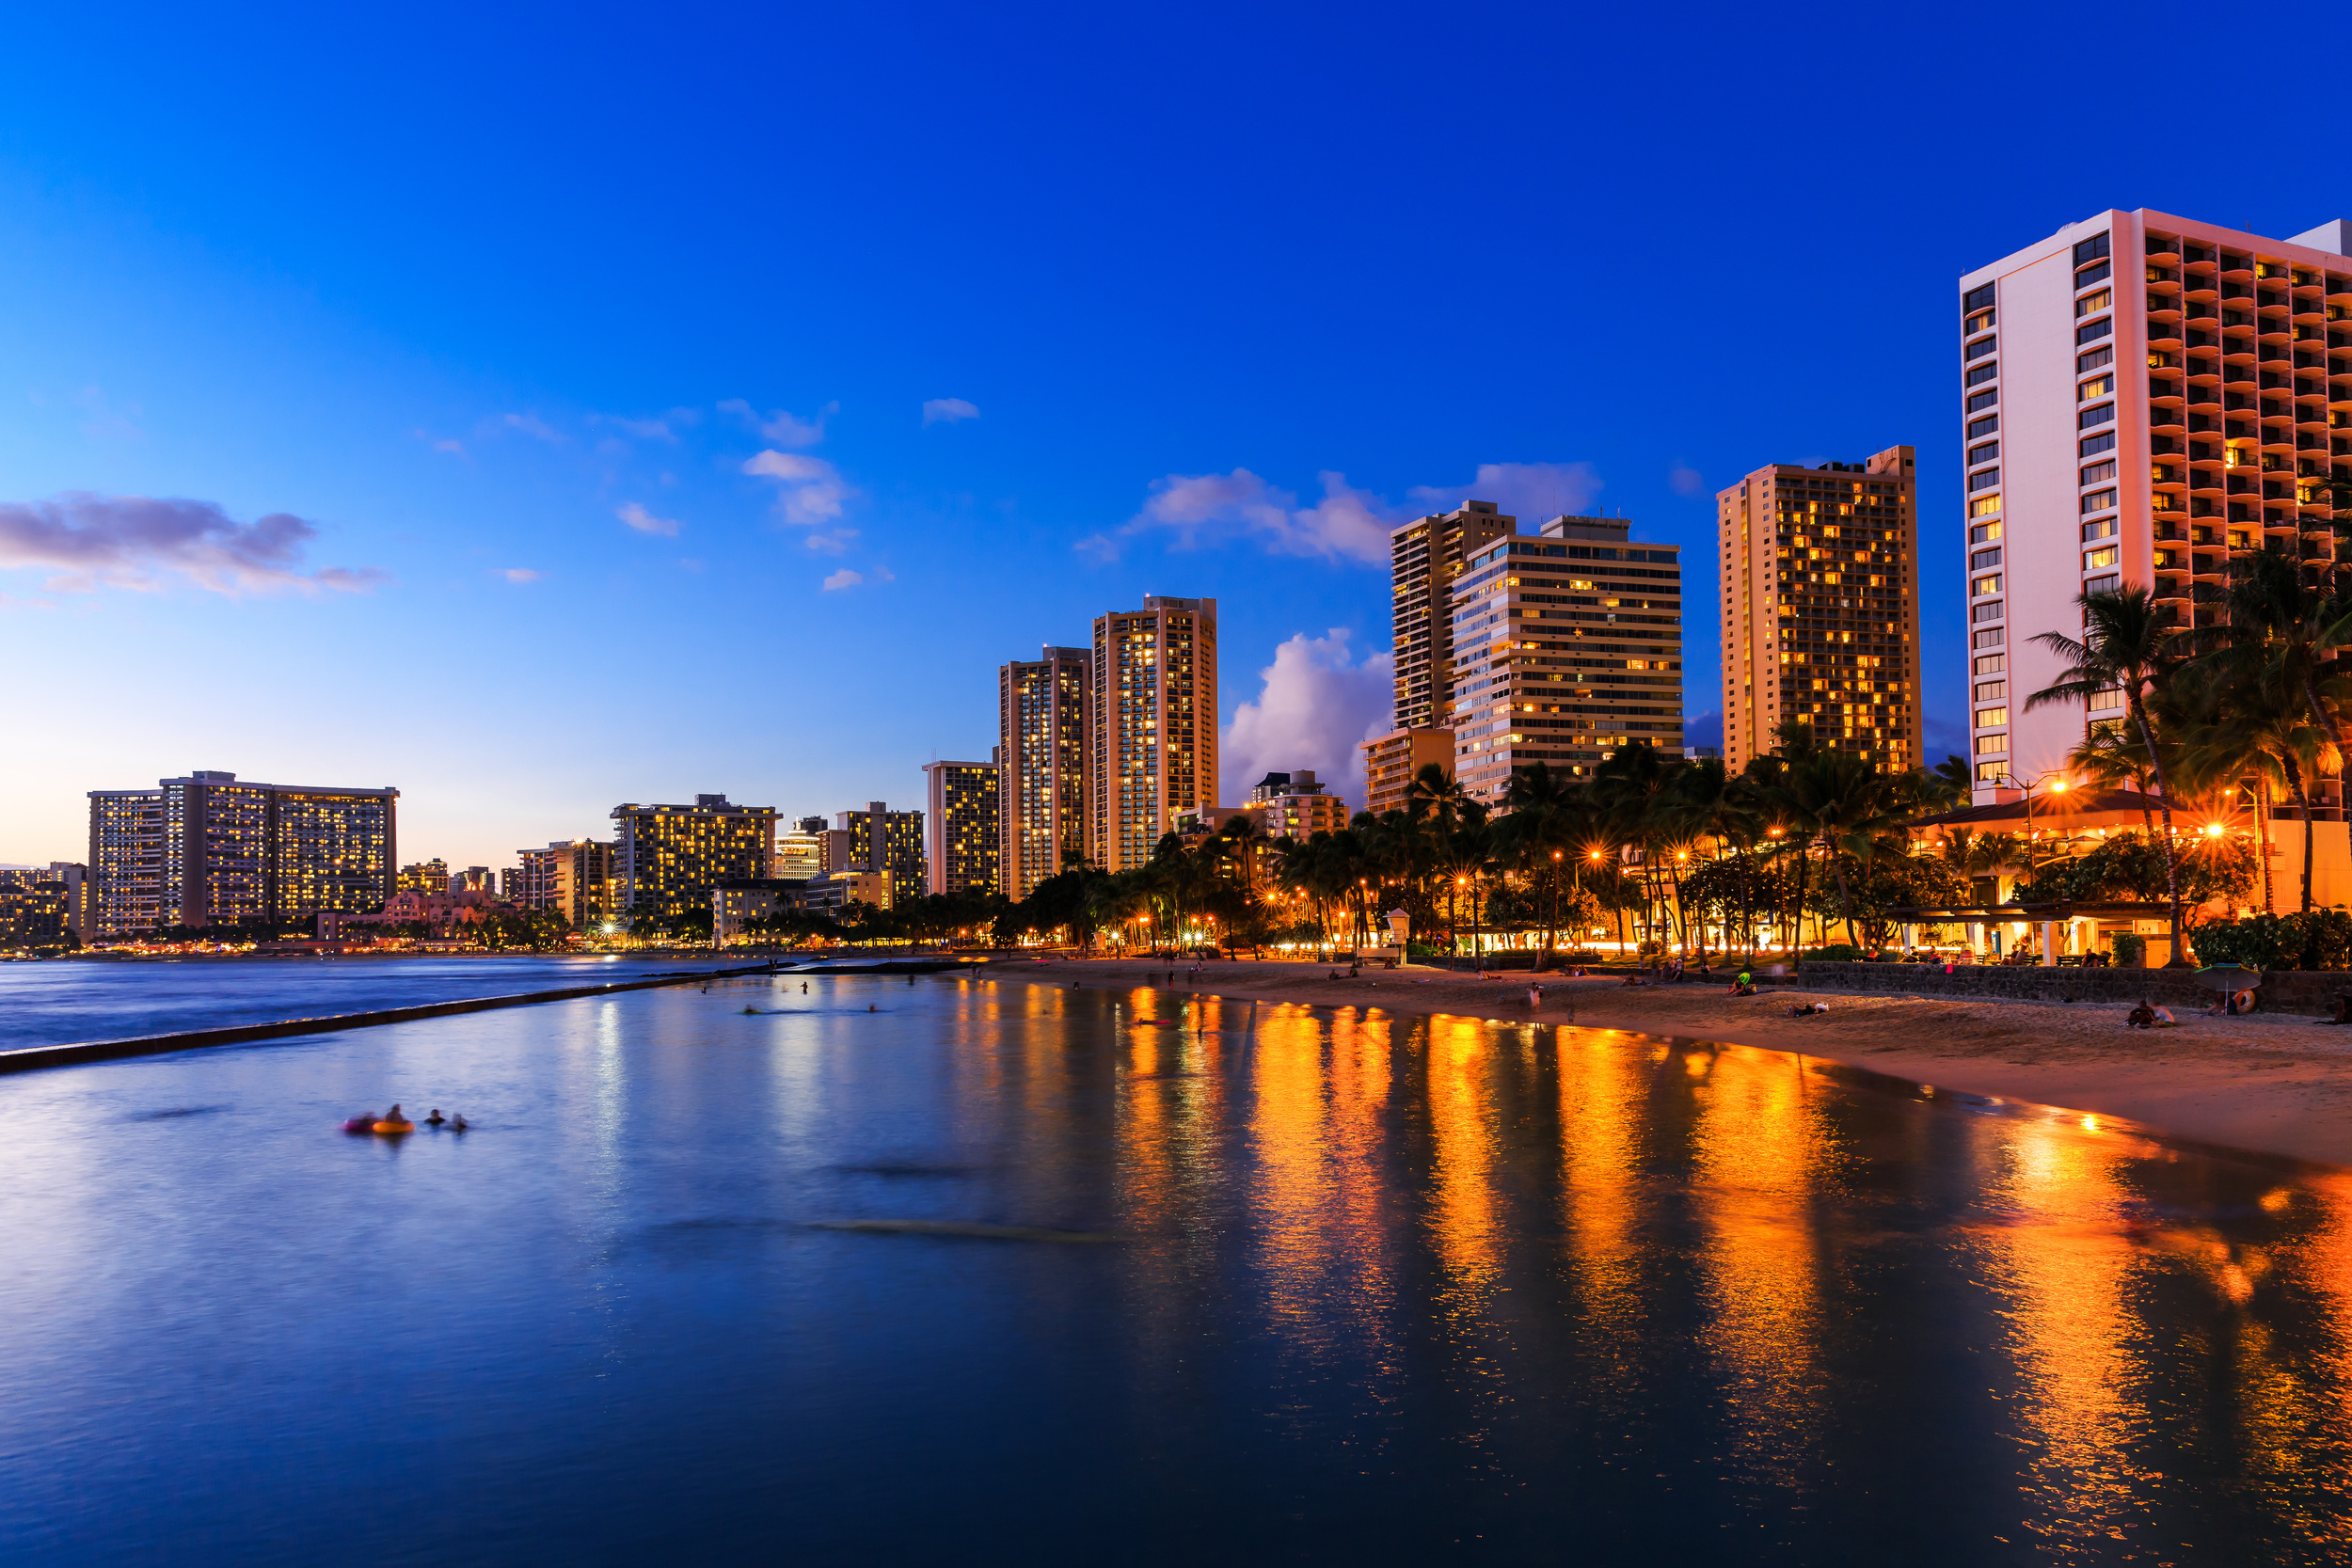 <p>Honolulu has just about every different vibe of bar you could ask for. Whether you want something quintessentially Hawaiian or are searching for something with a different cultural feel, you’ll be able to find it. There’s lots to do in Honolulu. </p><p>You may also like: <a href='https://www.yardbarker.com/lifestyle/articles/20_tips_and_tricks_for_selling_your_stuff_online/s1__35553122'>20 tips and tricks for selling your stuff online</a></p>